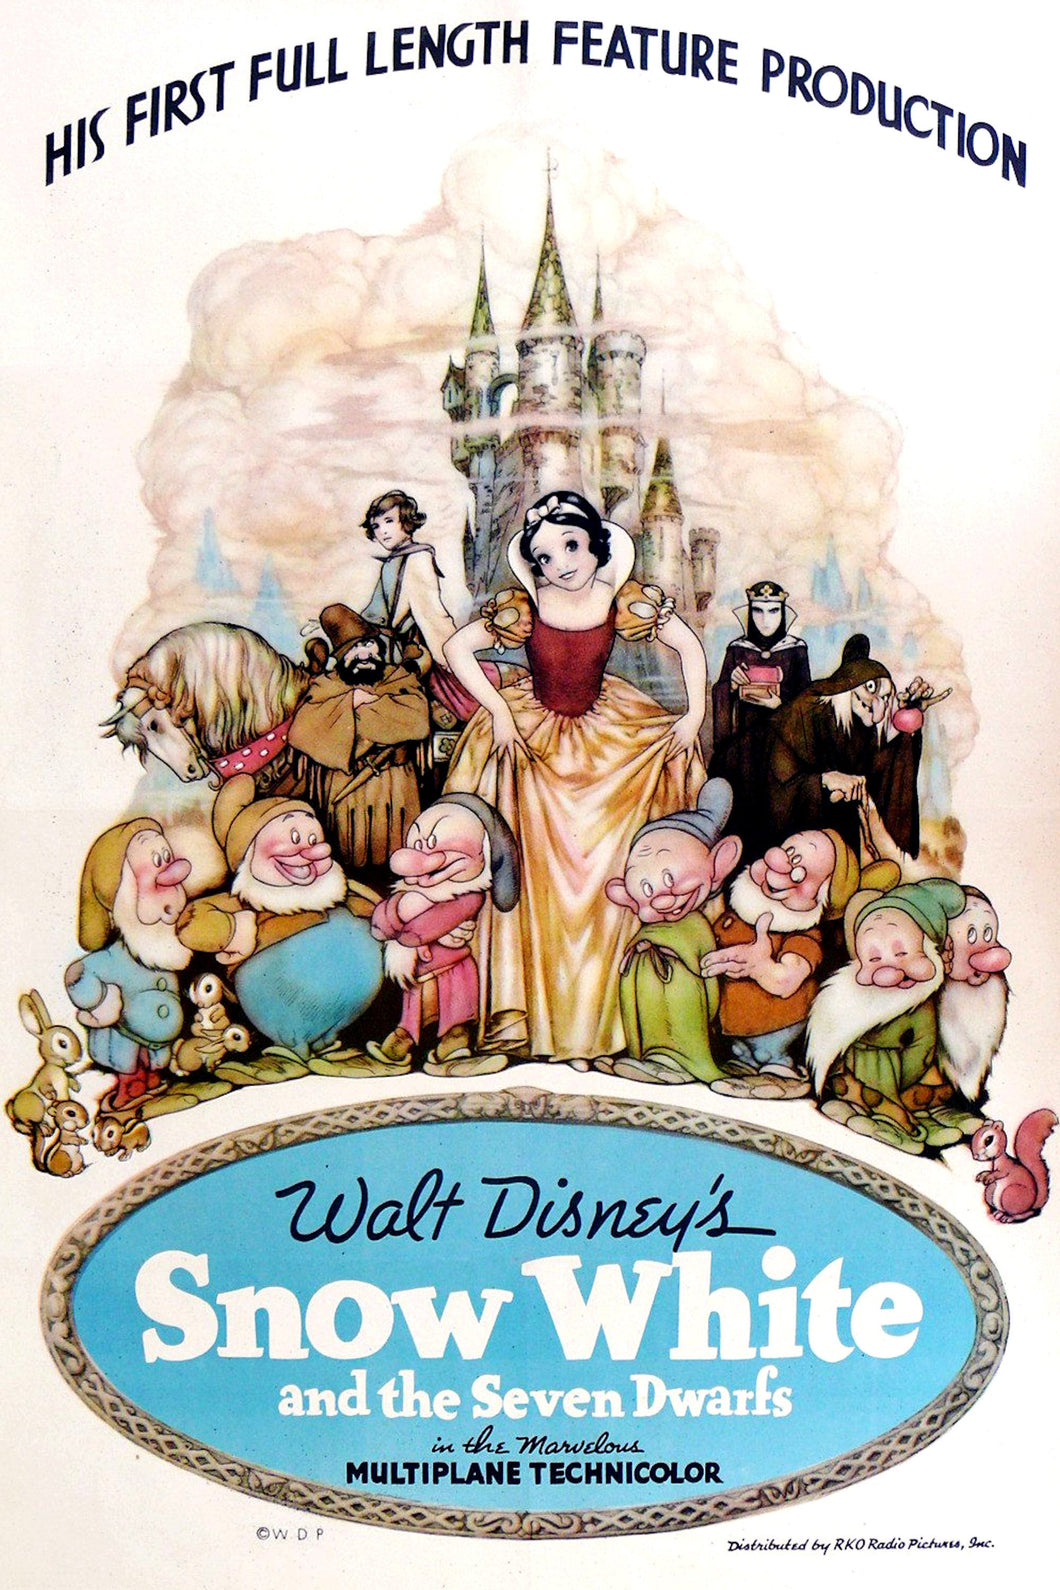 Snow White And The Seven Dwarfs (1937) V2 Animated Movie Poster Framed or Unframed Glossy Poster Free UK Shipping!!!